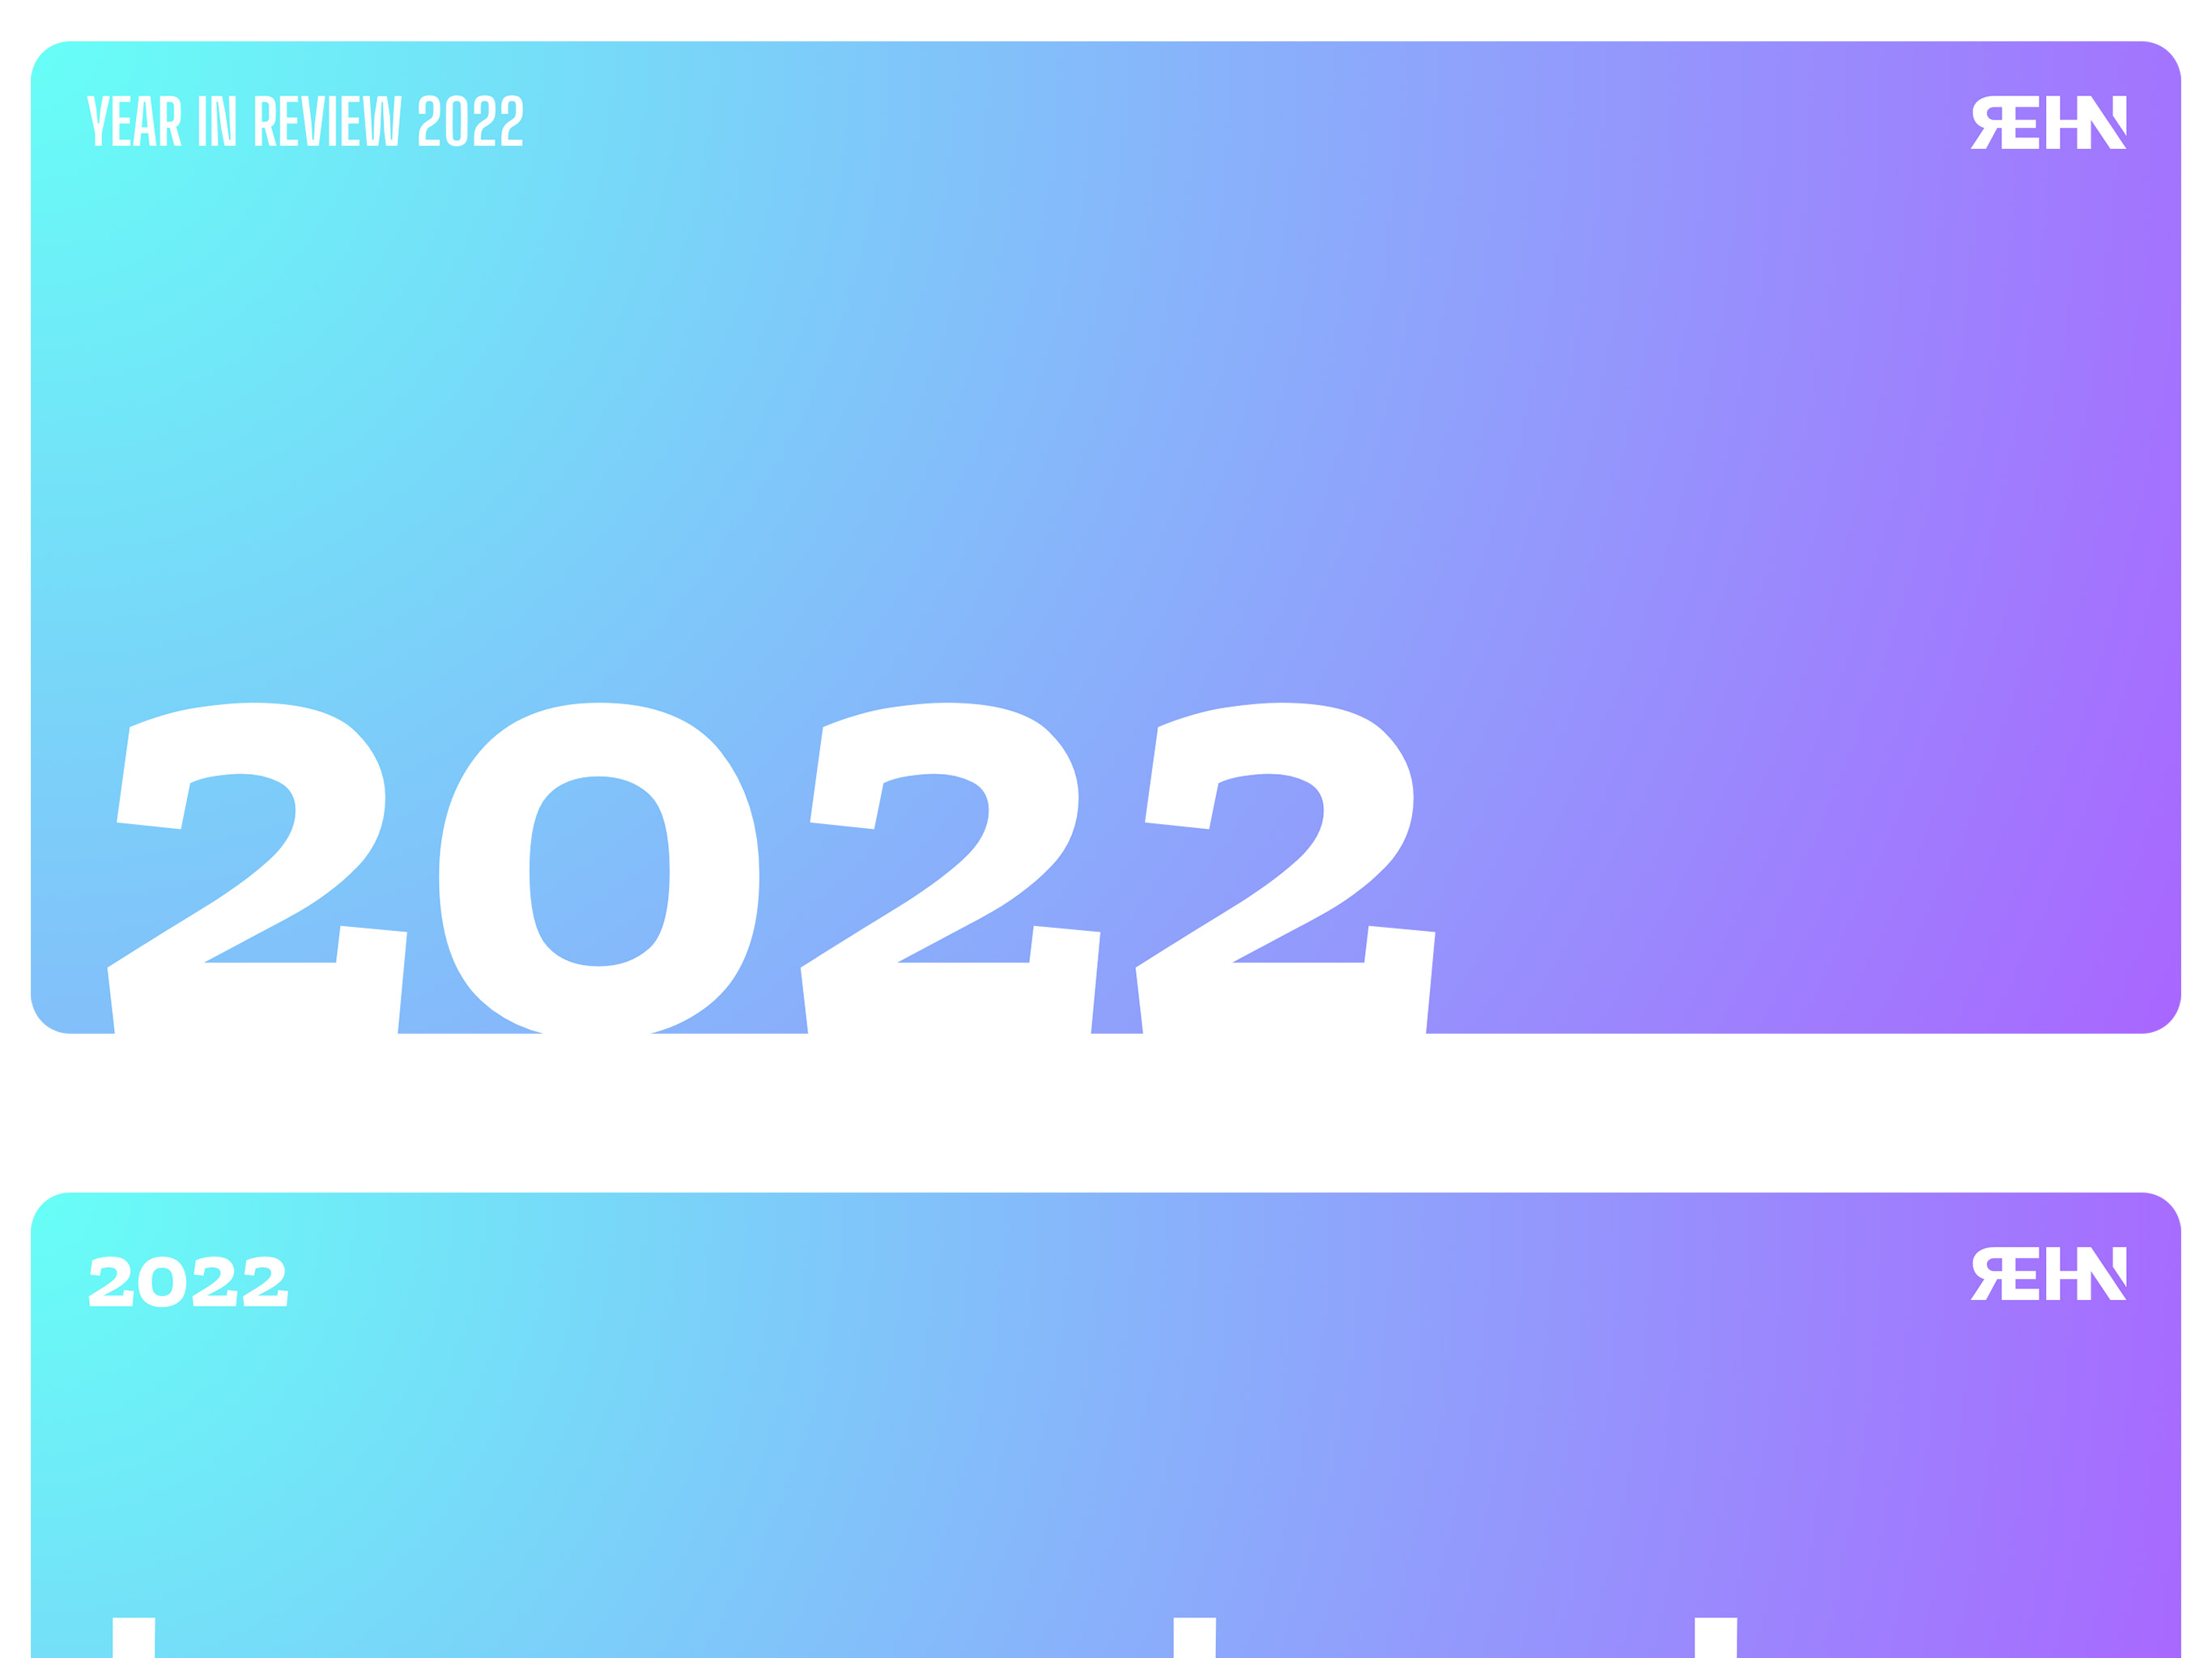 2022 header within a full height card with numbering